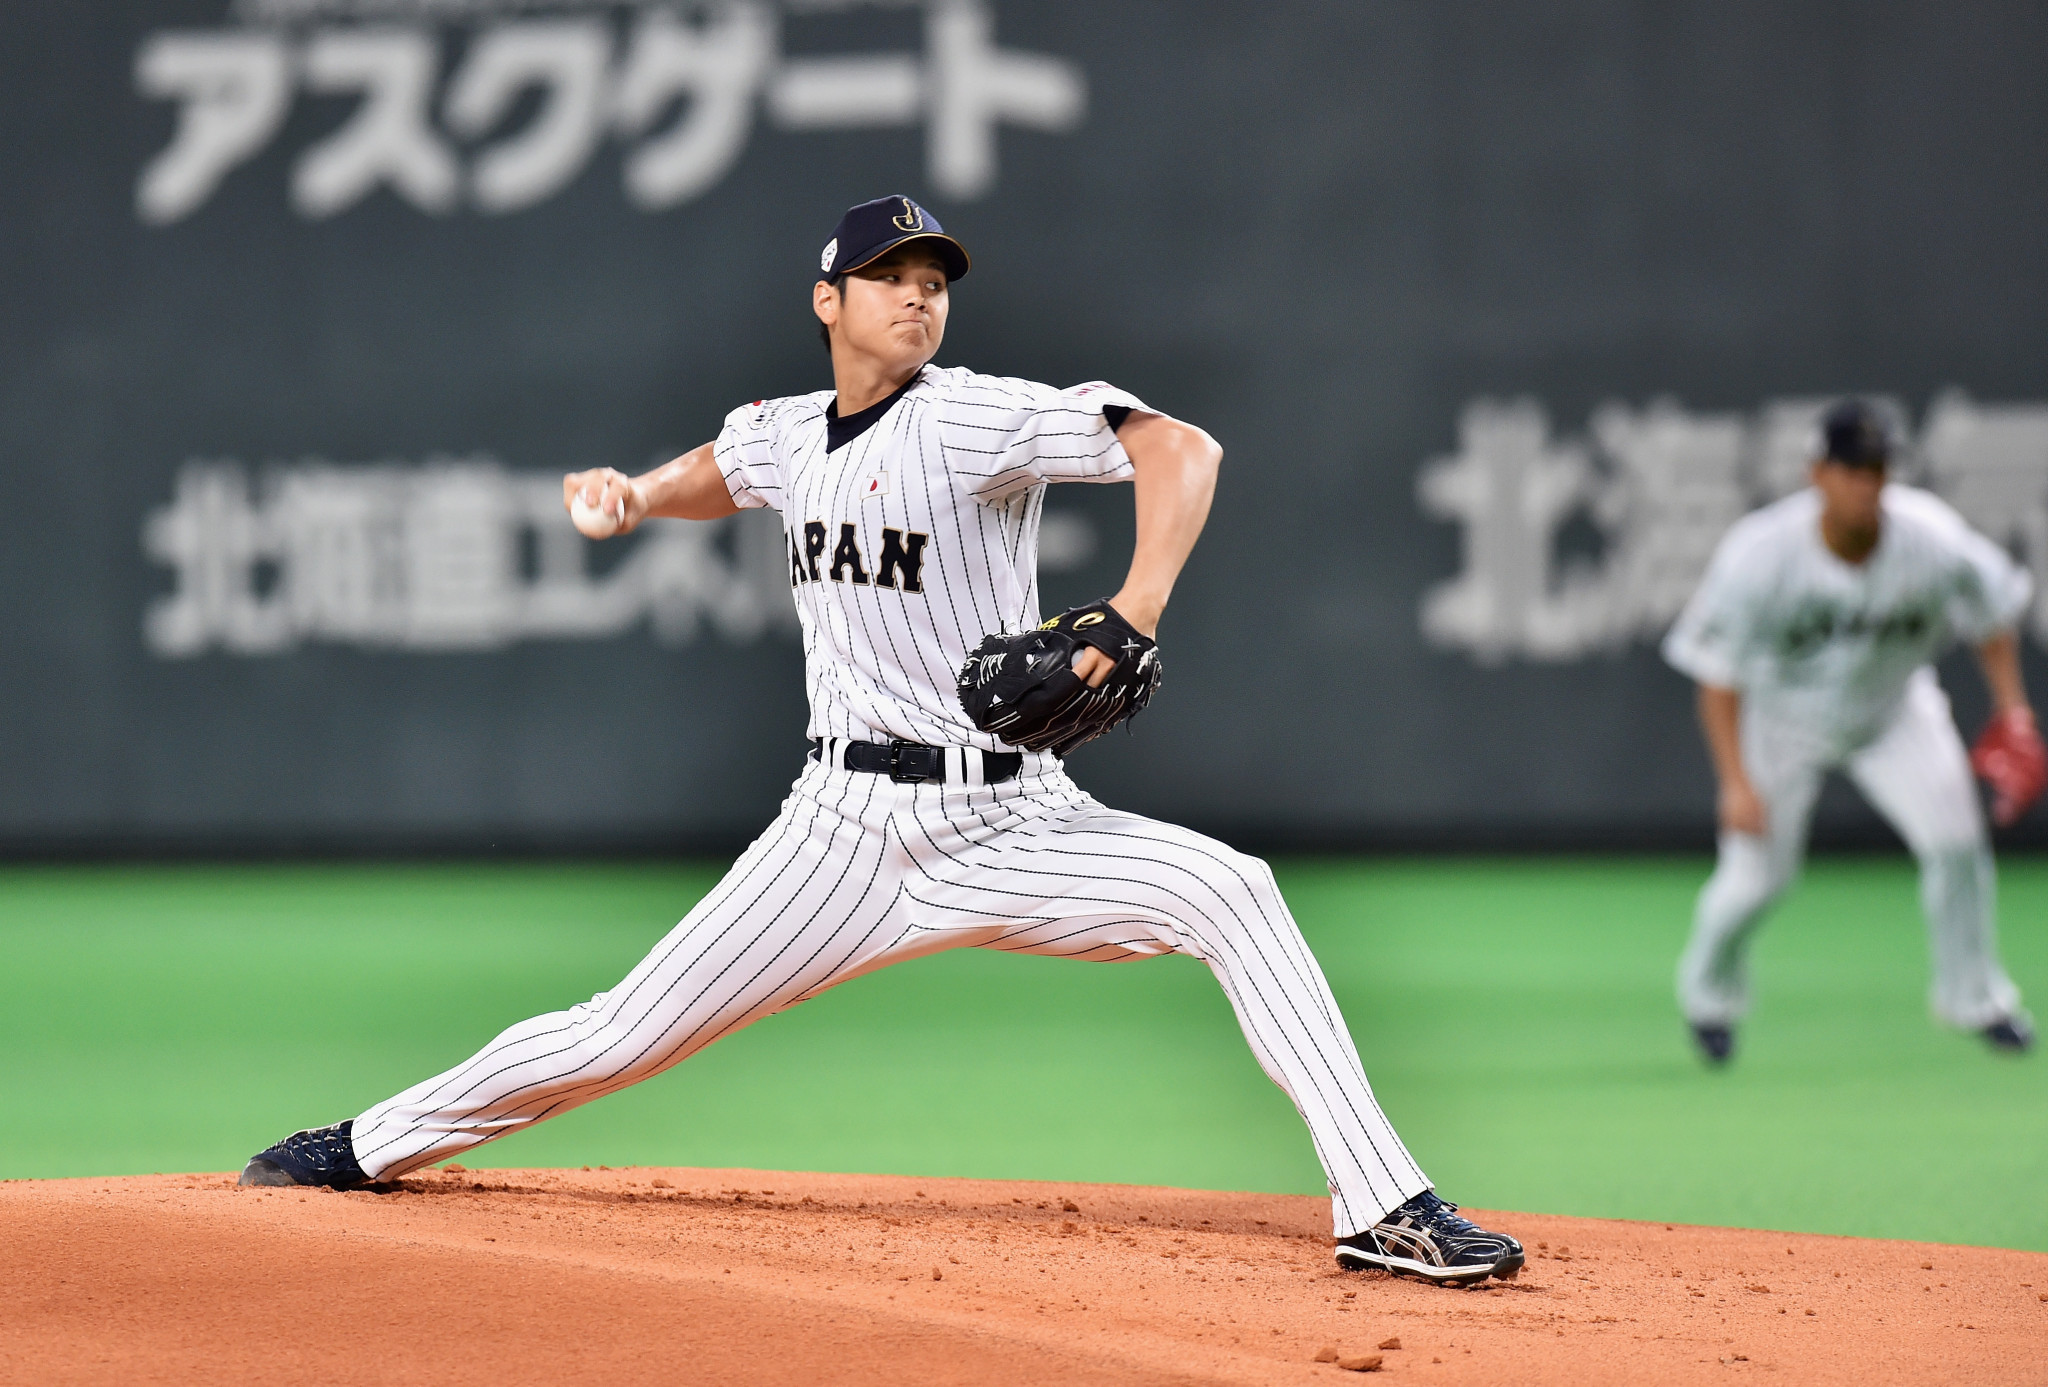 Two-way phenomenon Ohtani to play for Japan in World Baseball Classic